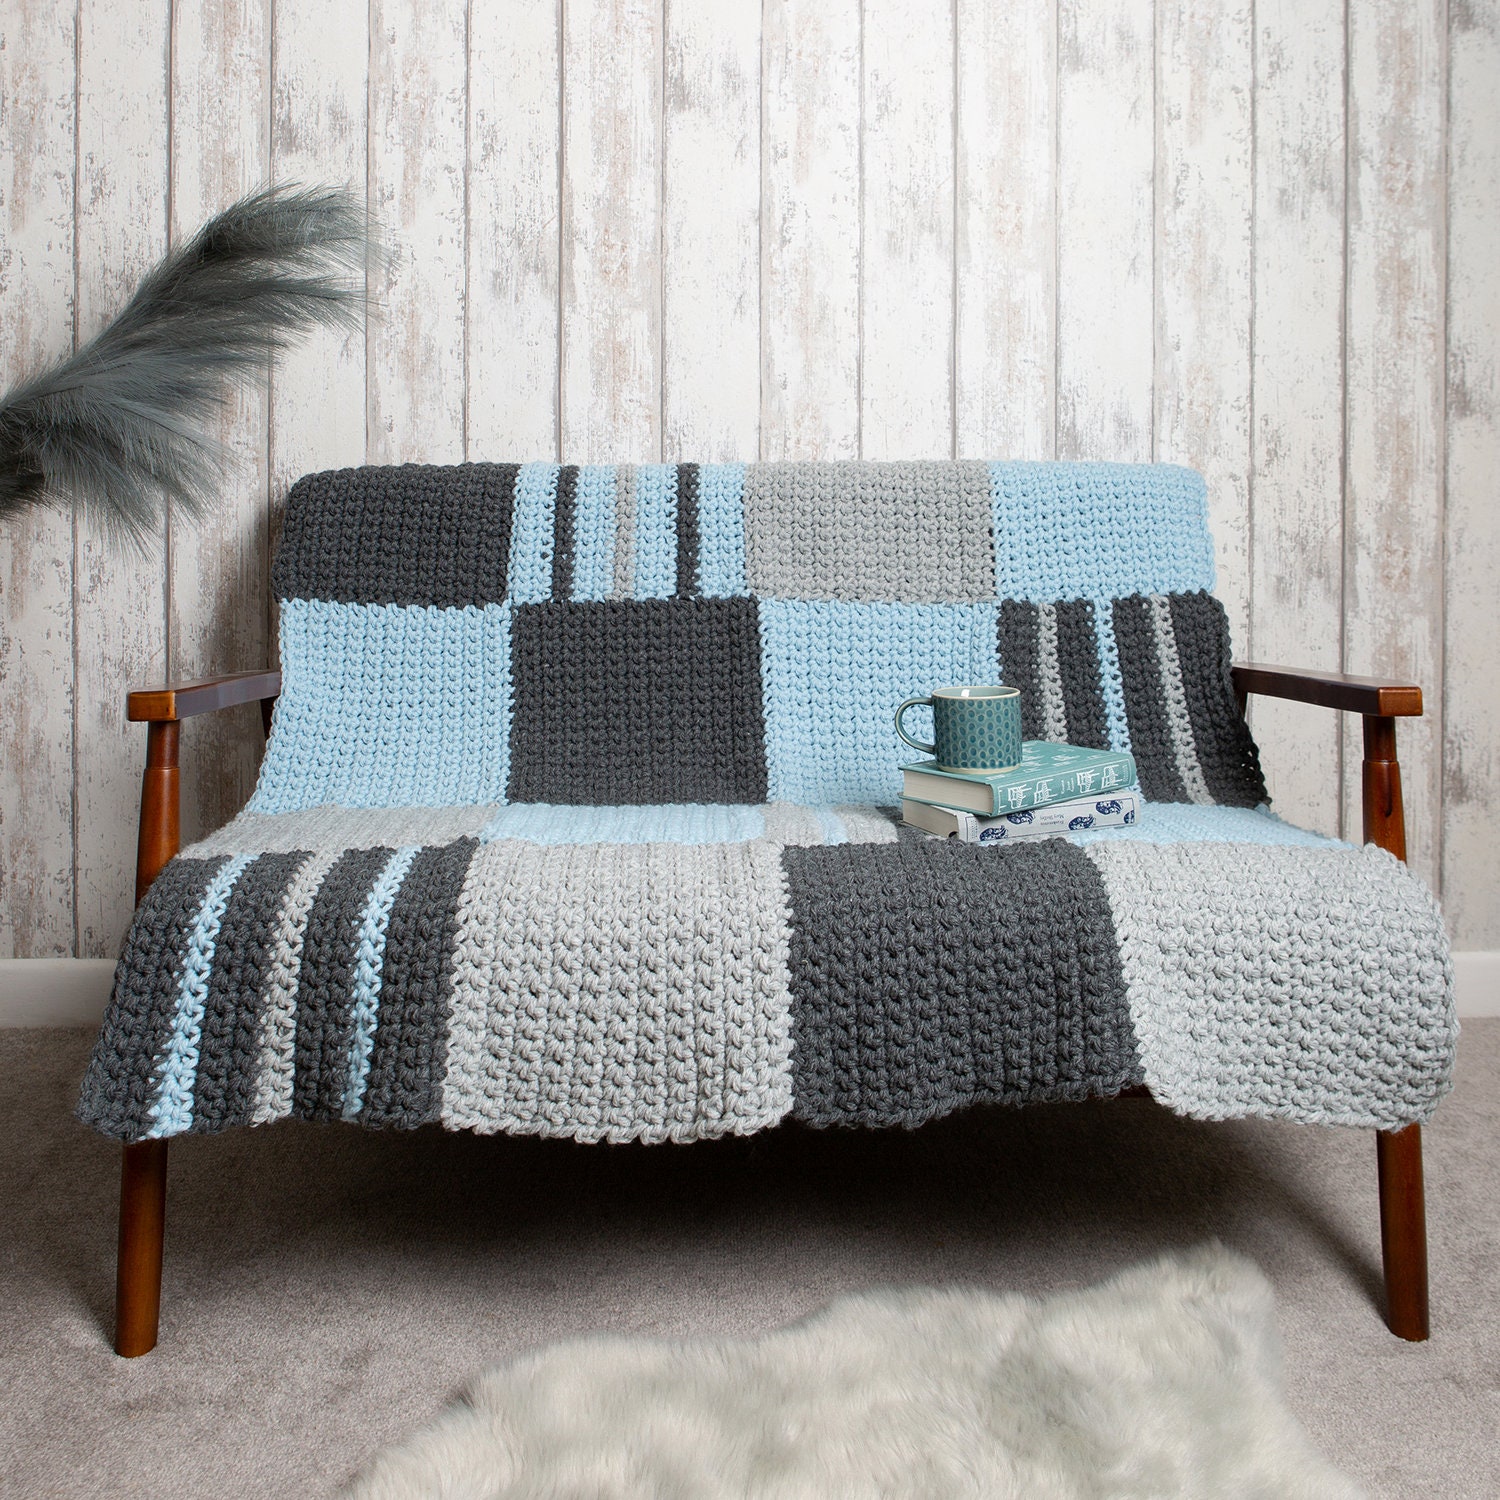 Beginners Chequered Large Blanket Crochet Kit Blue Easy Beginners Blanket  Throw Blanket Pattern by Wool Couture 